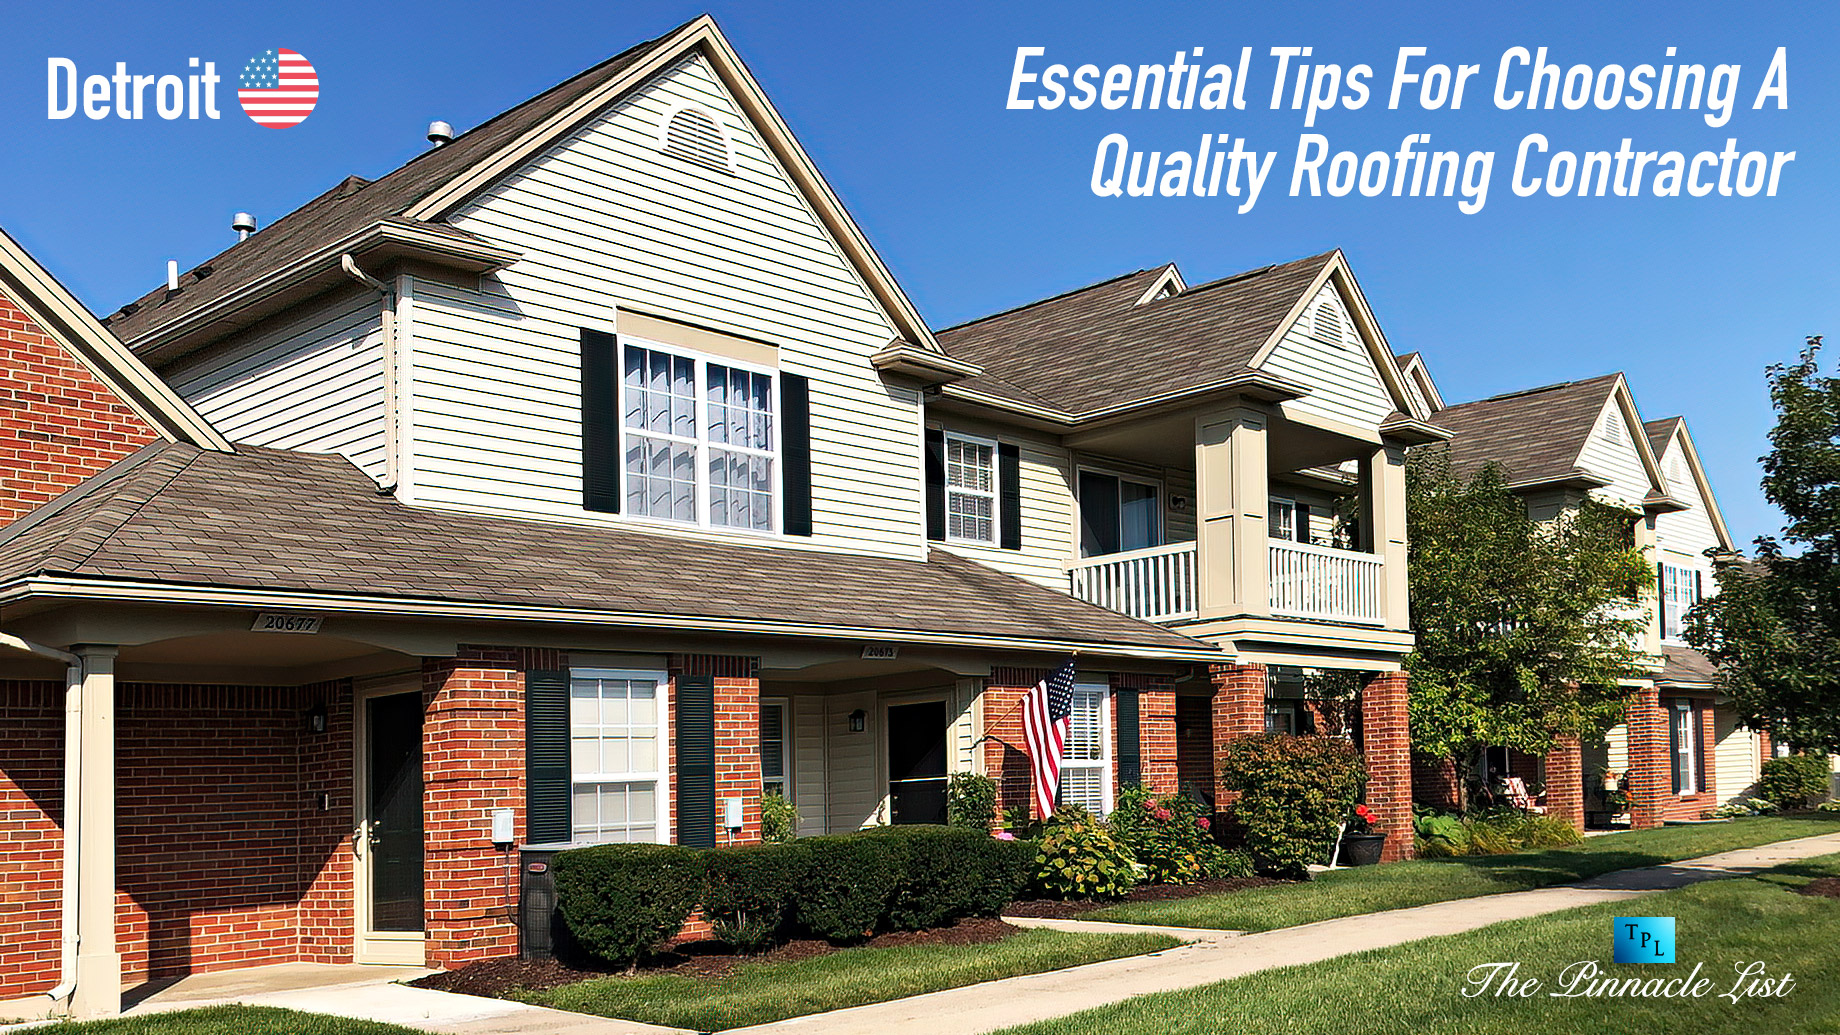 Essential Tips For Choosing A Quality Roofing Contractor In Detroit